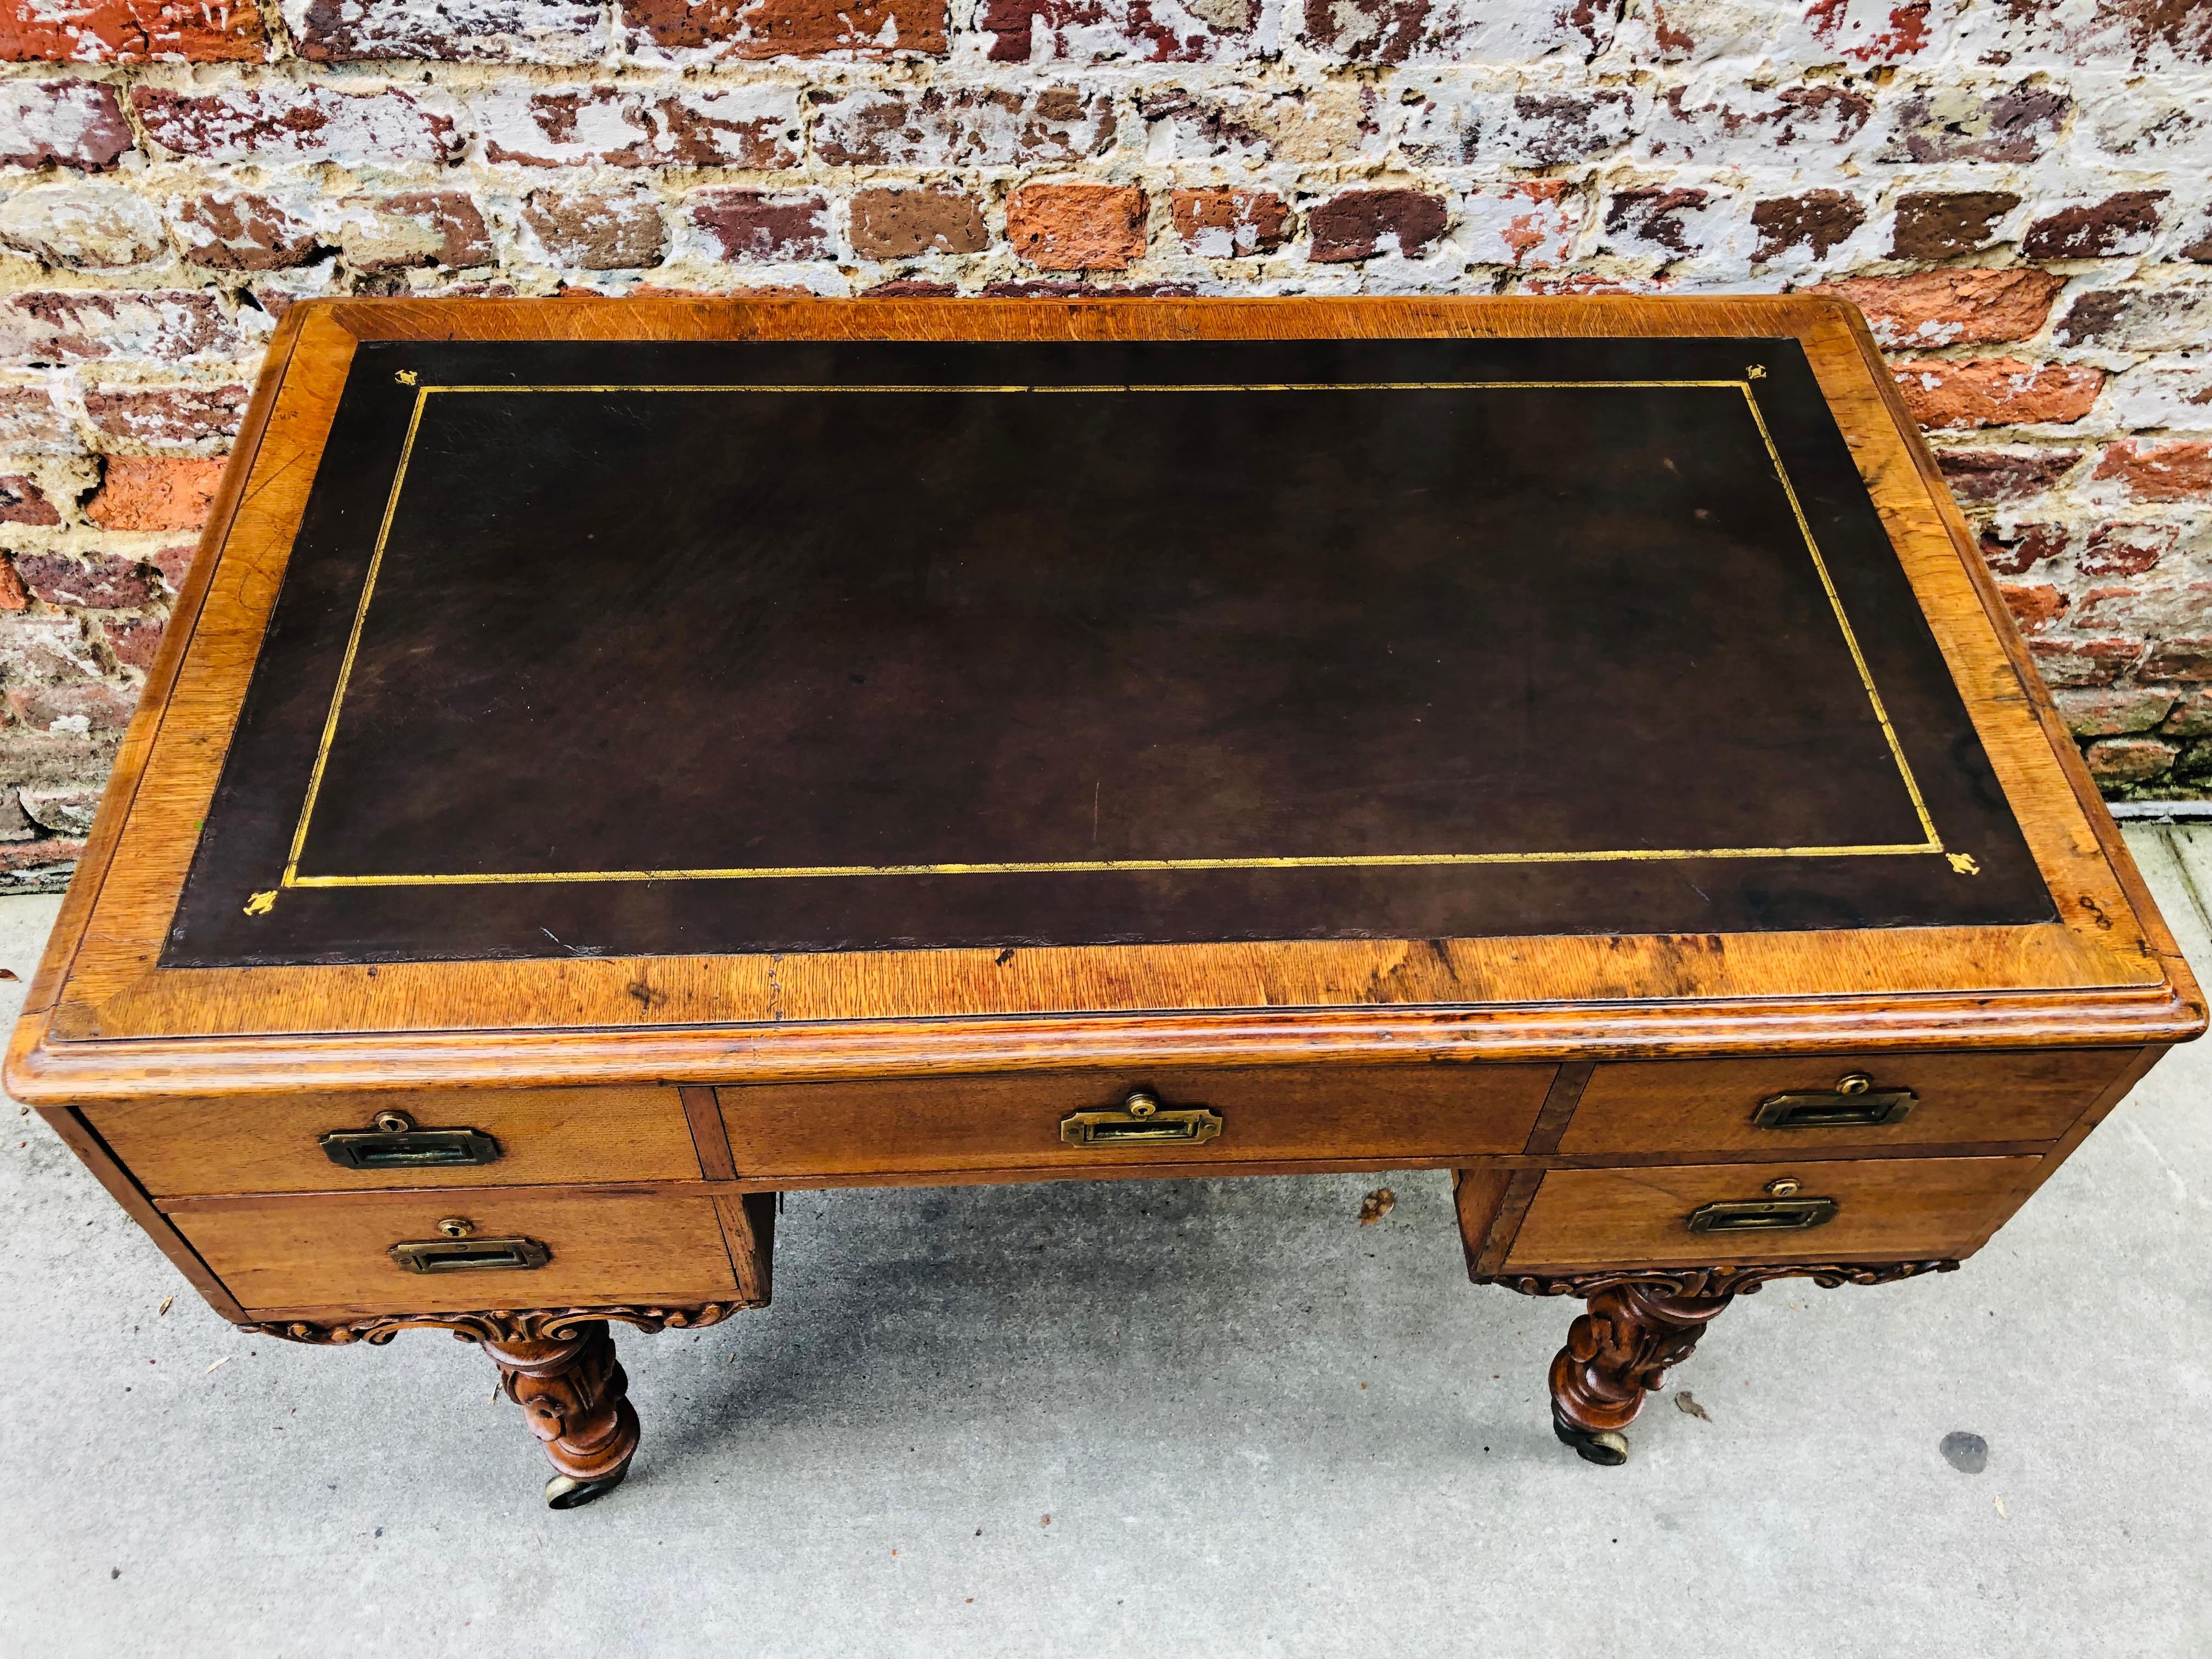 English Irish Campaign Desk with Removable Legs, Late 19th Century